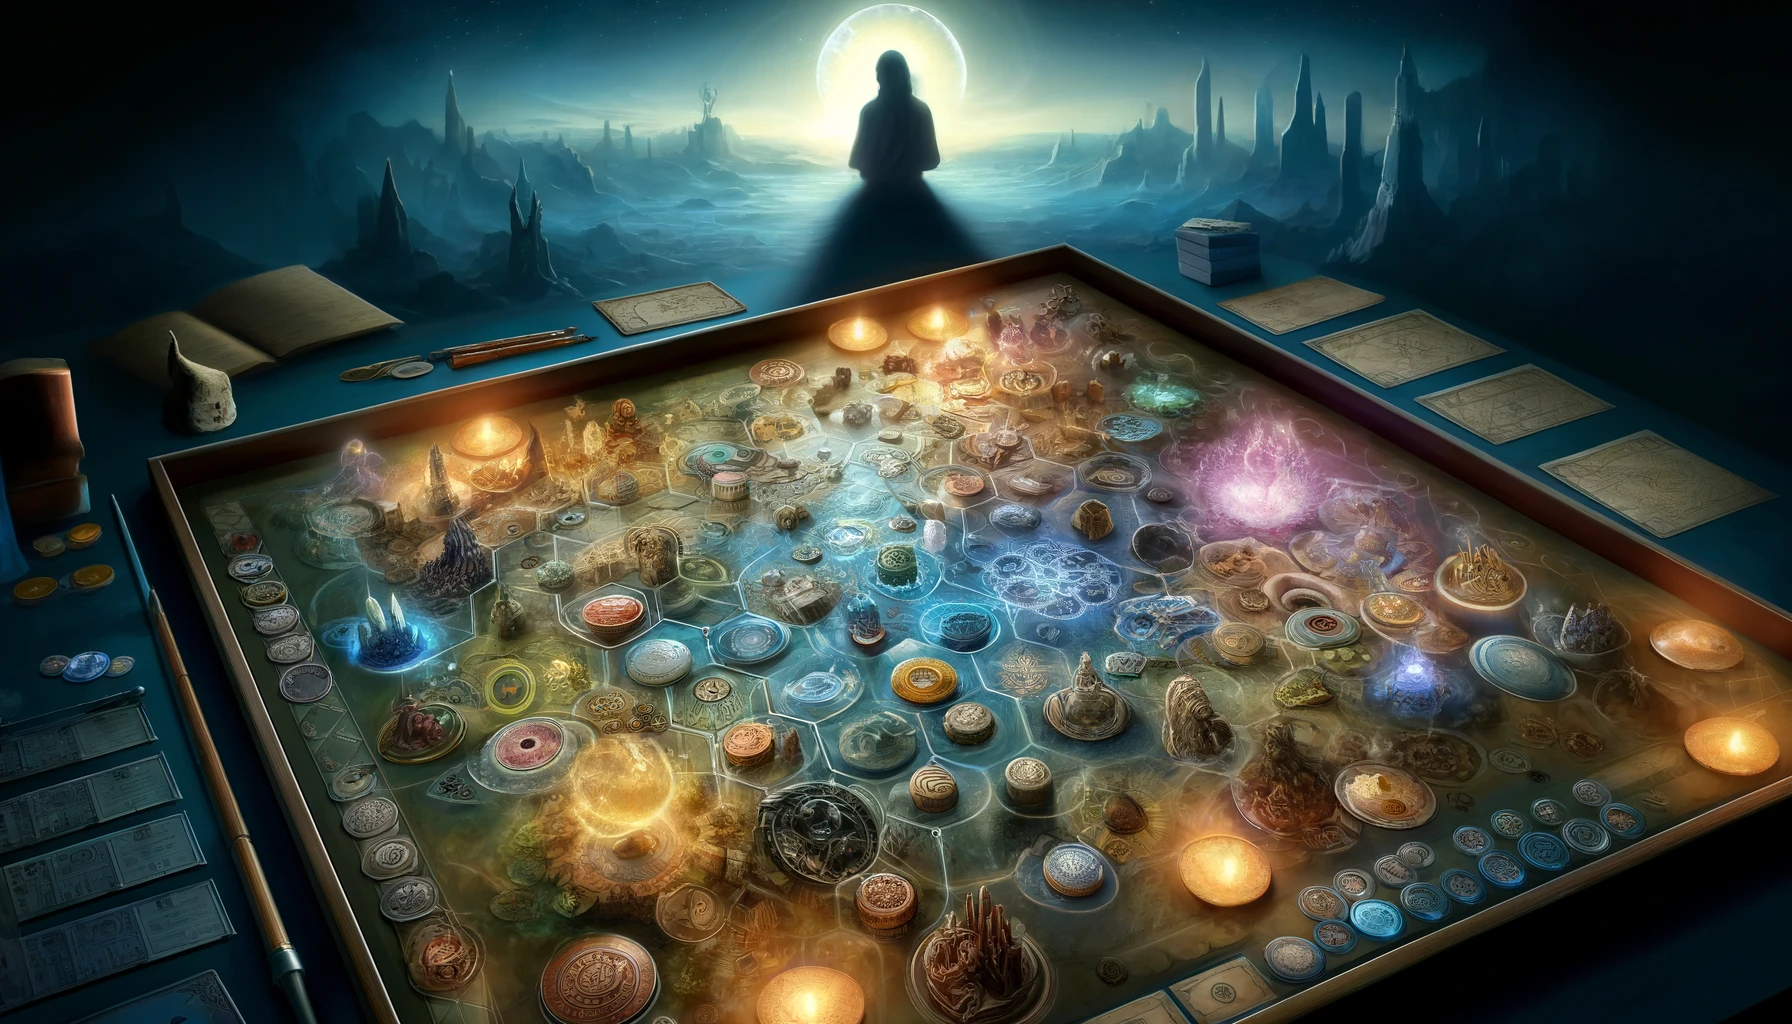 Mystical board game with glowing elements and ethereal backdrop